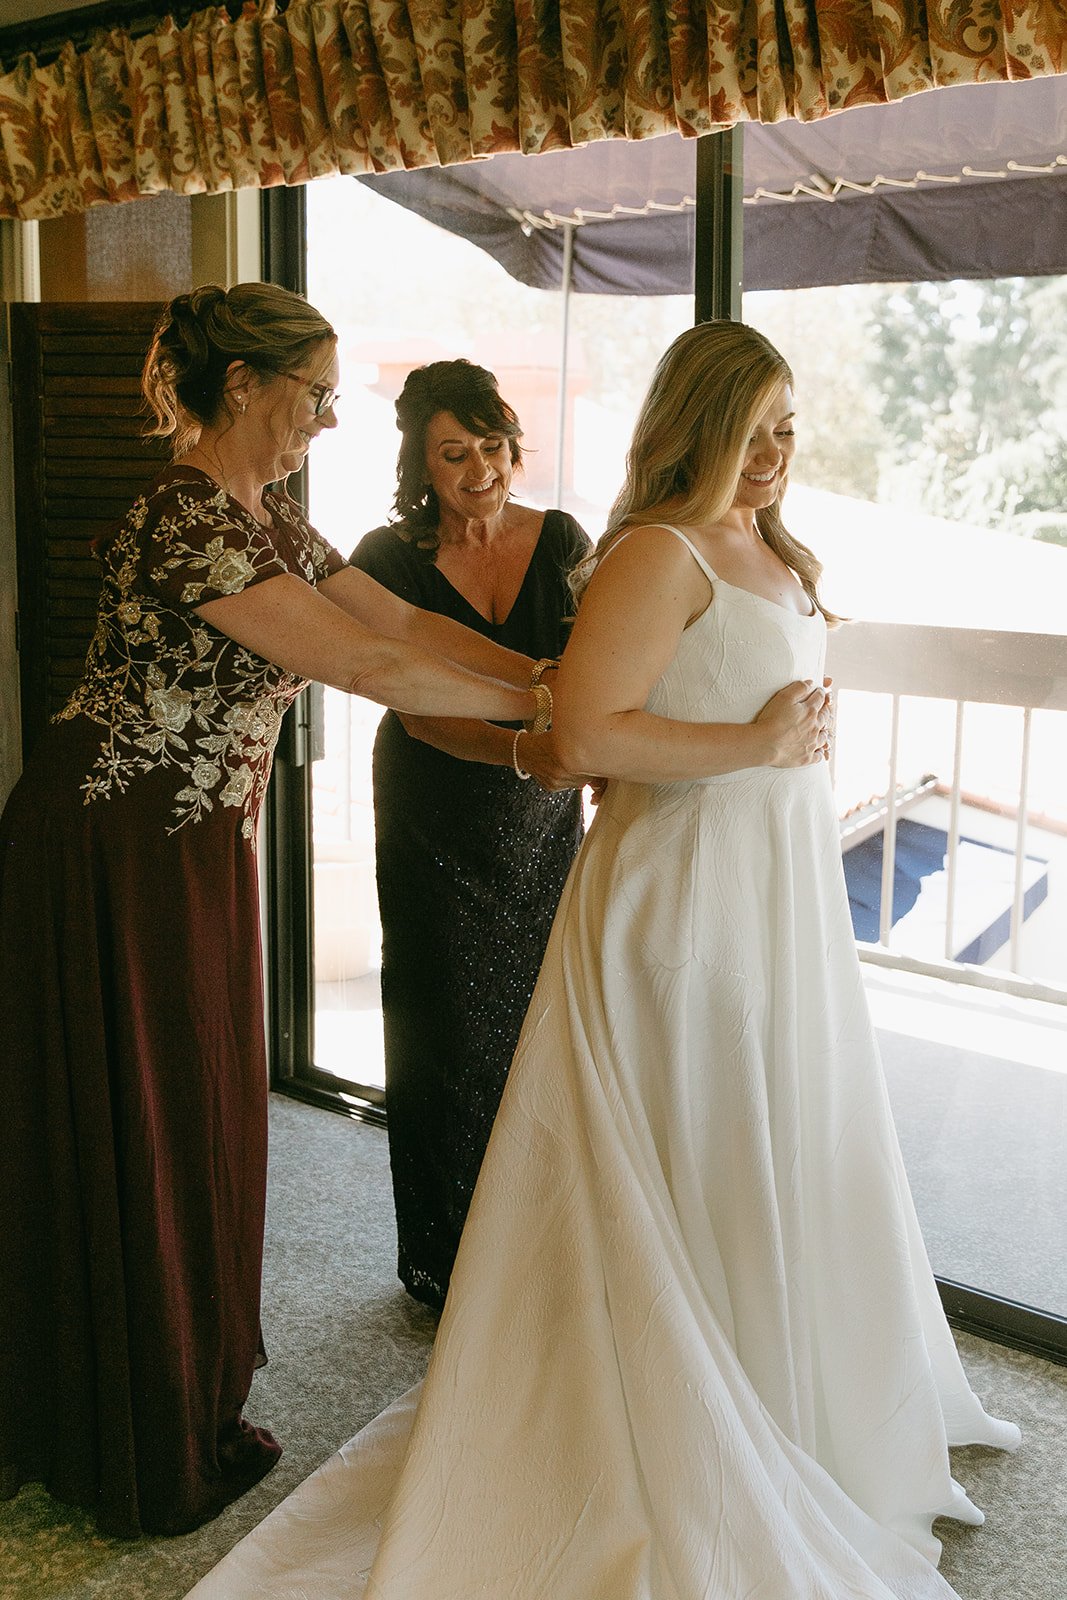 Bride getting ready with family